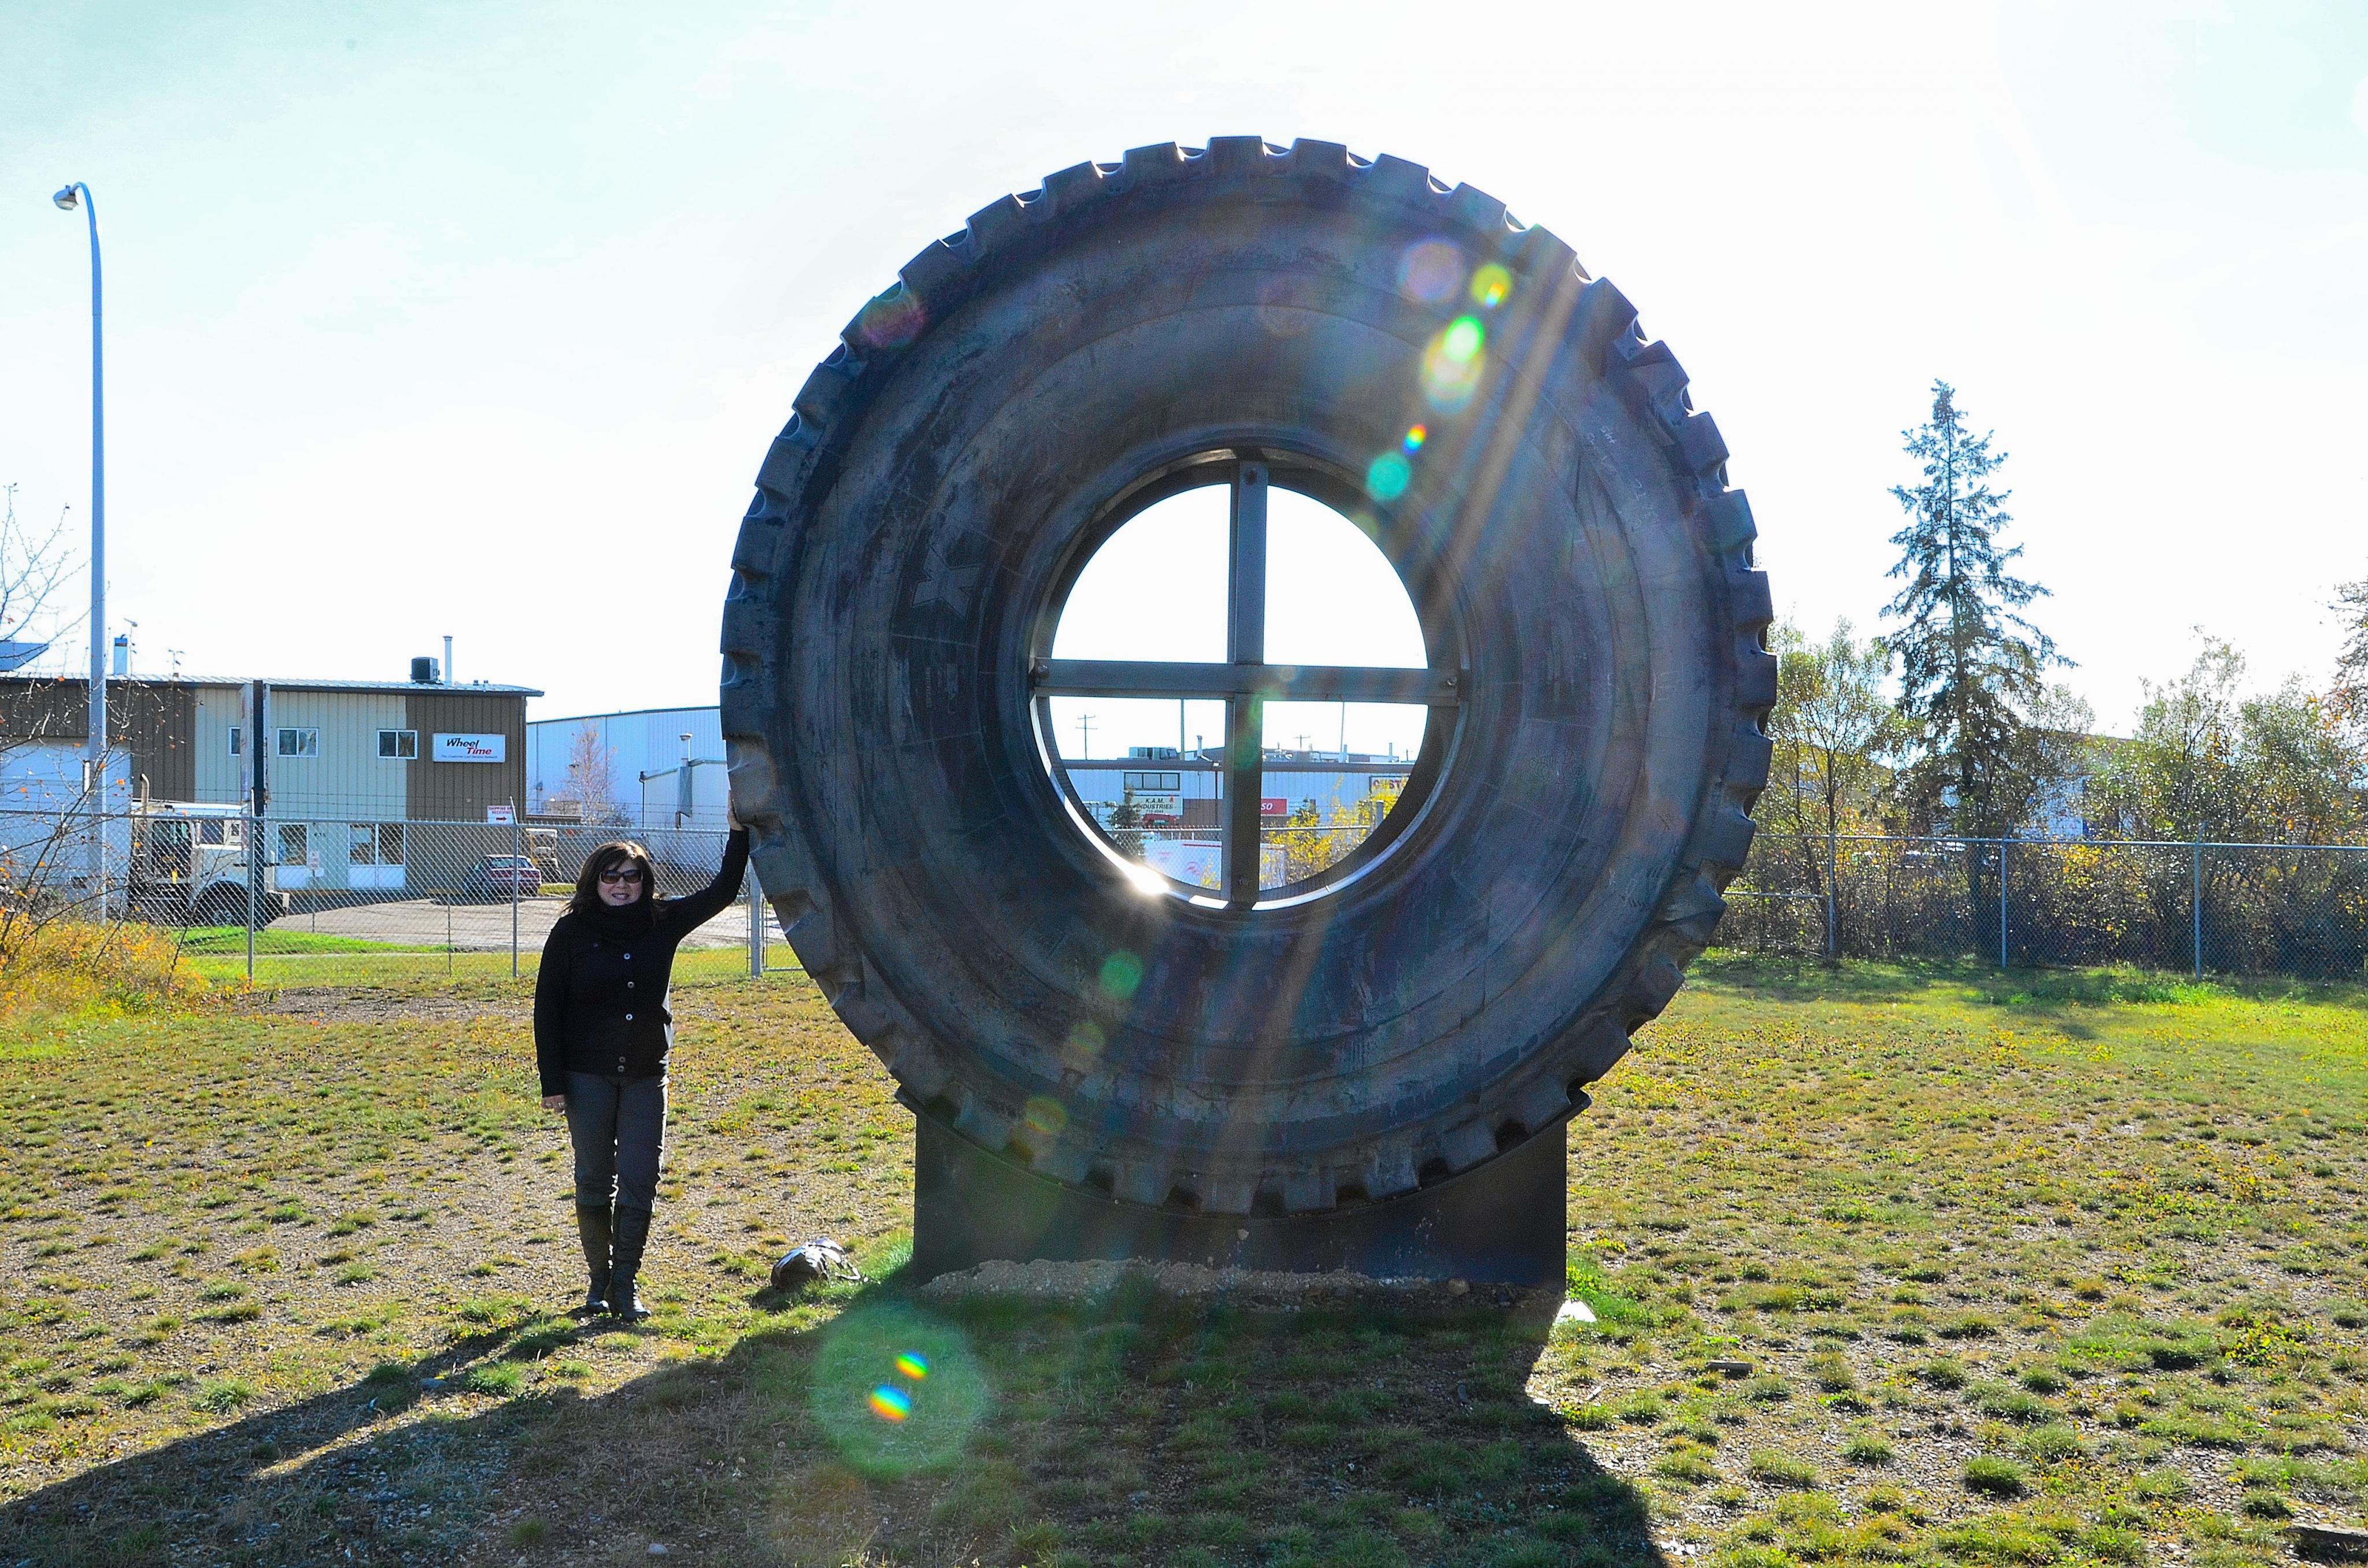 gail-with-a-caterpillar-797-tire-at-the-osdc.jpg